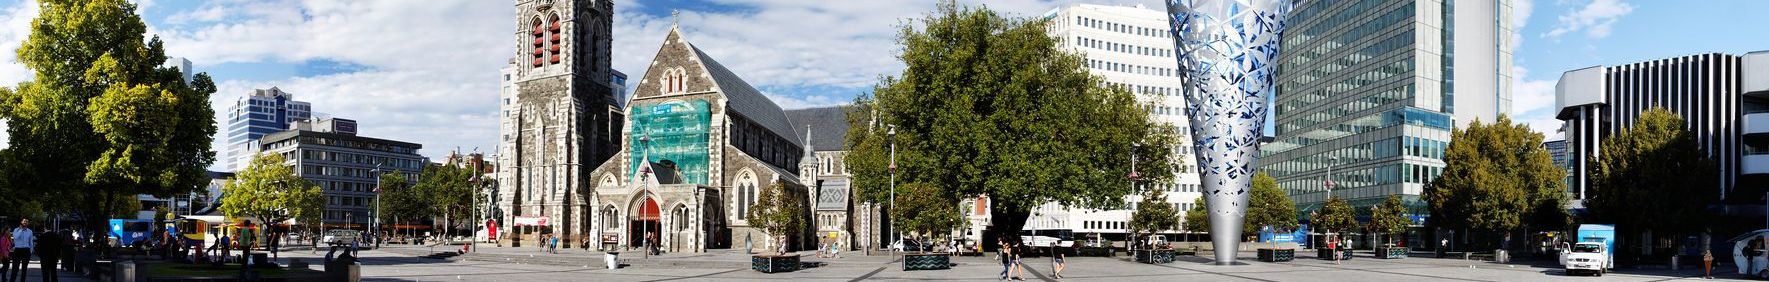 Christchurch_Cathedral_Square